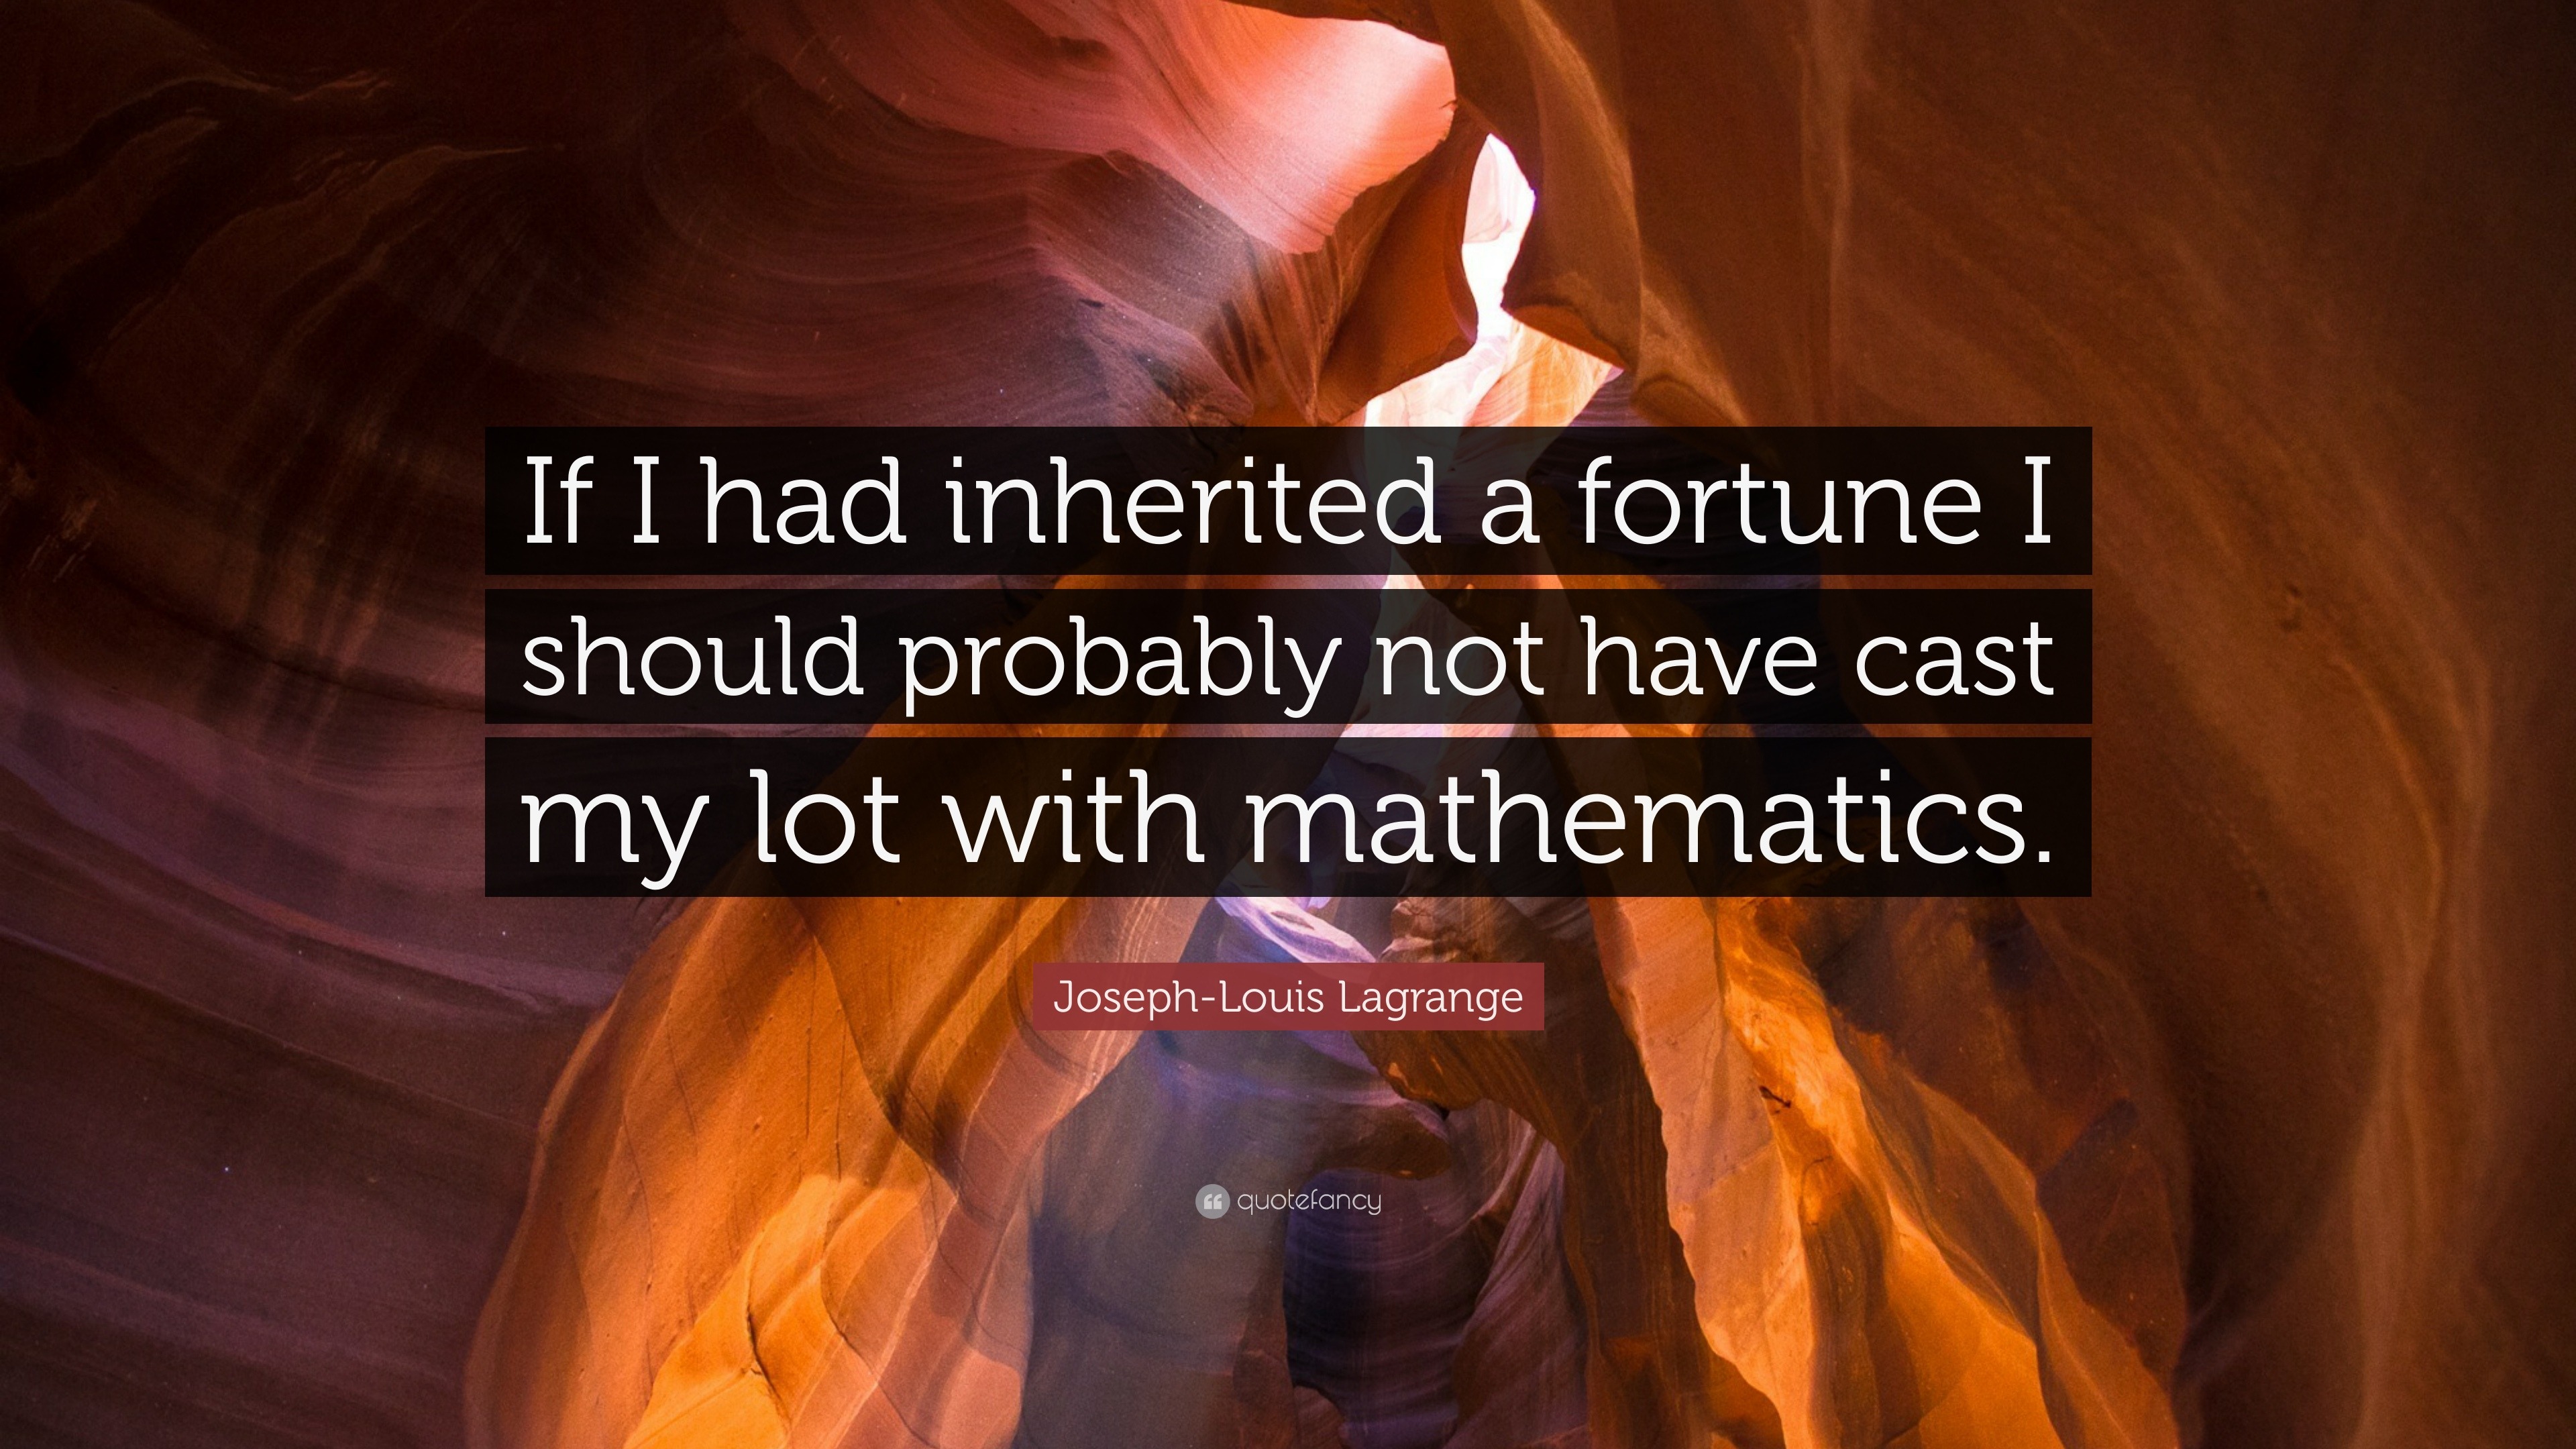 Joseph-Louis Lagrange Quote: “If I had inherited a fortune I should probably not have cast my ...